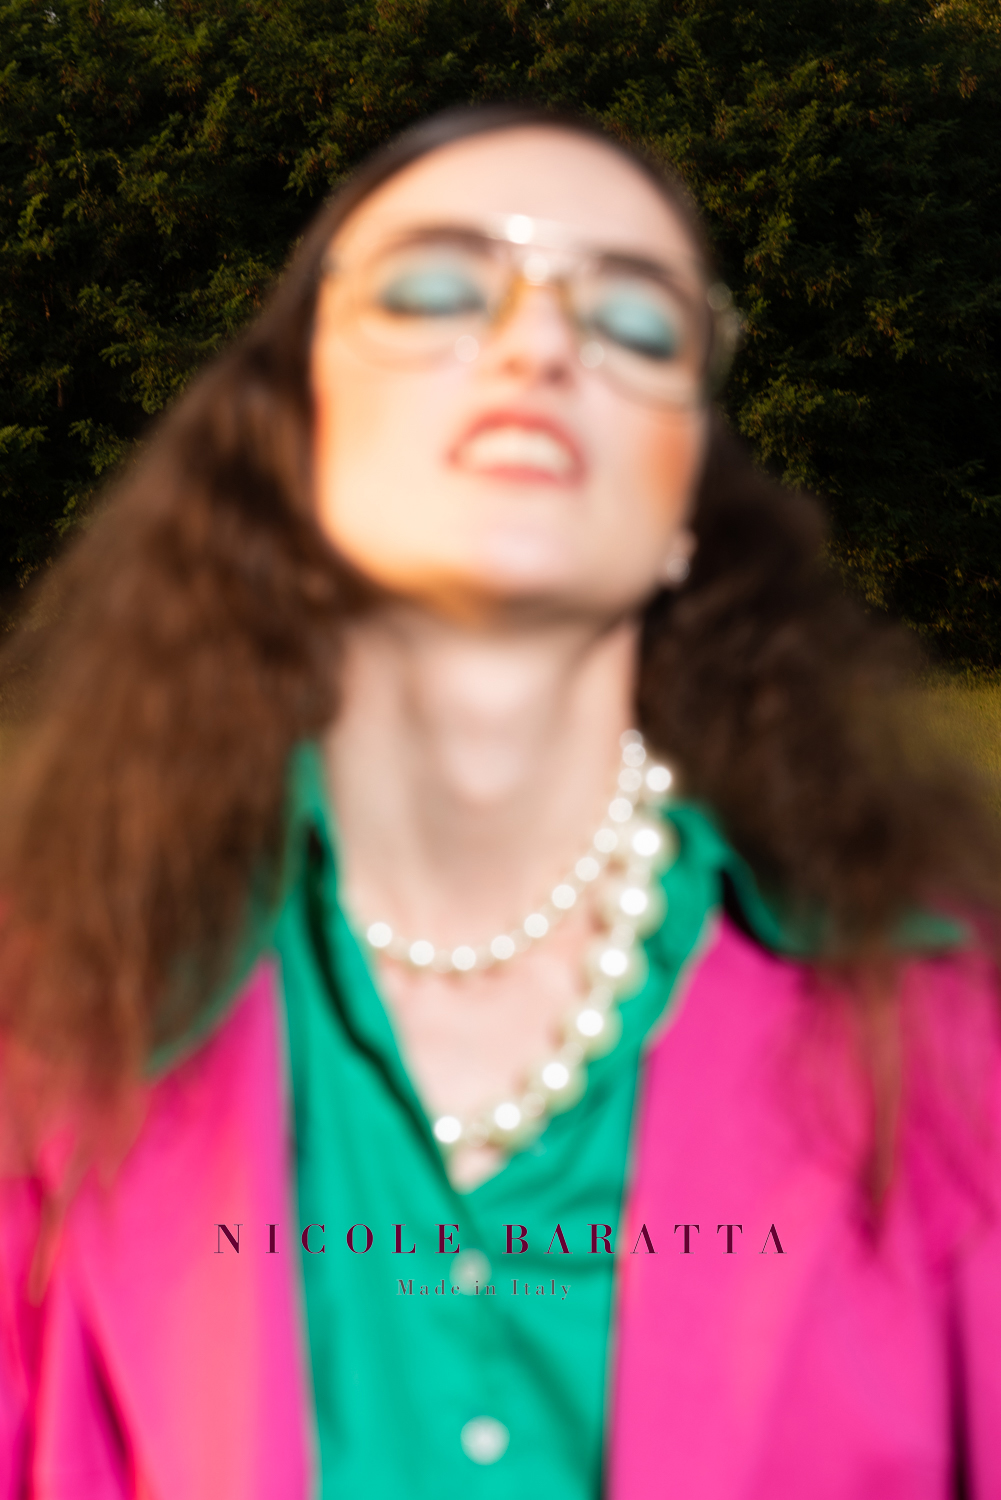 CoqCreative power by ProductionLink s.r.l. Nicole Baratta Nicole-Baratta  Nicole Baratta